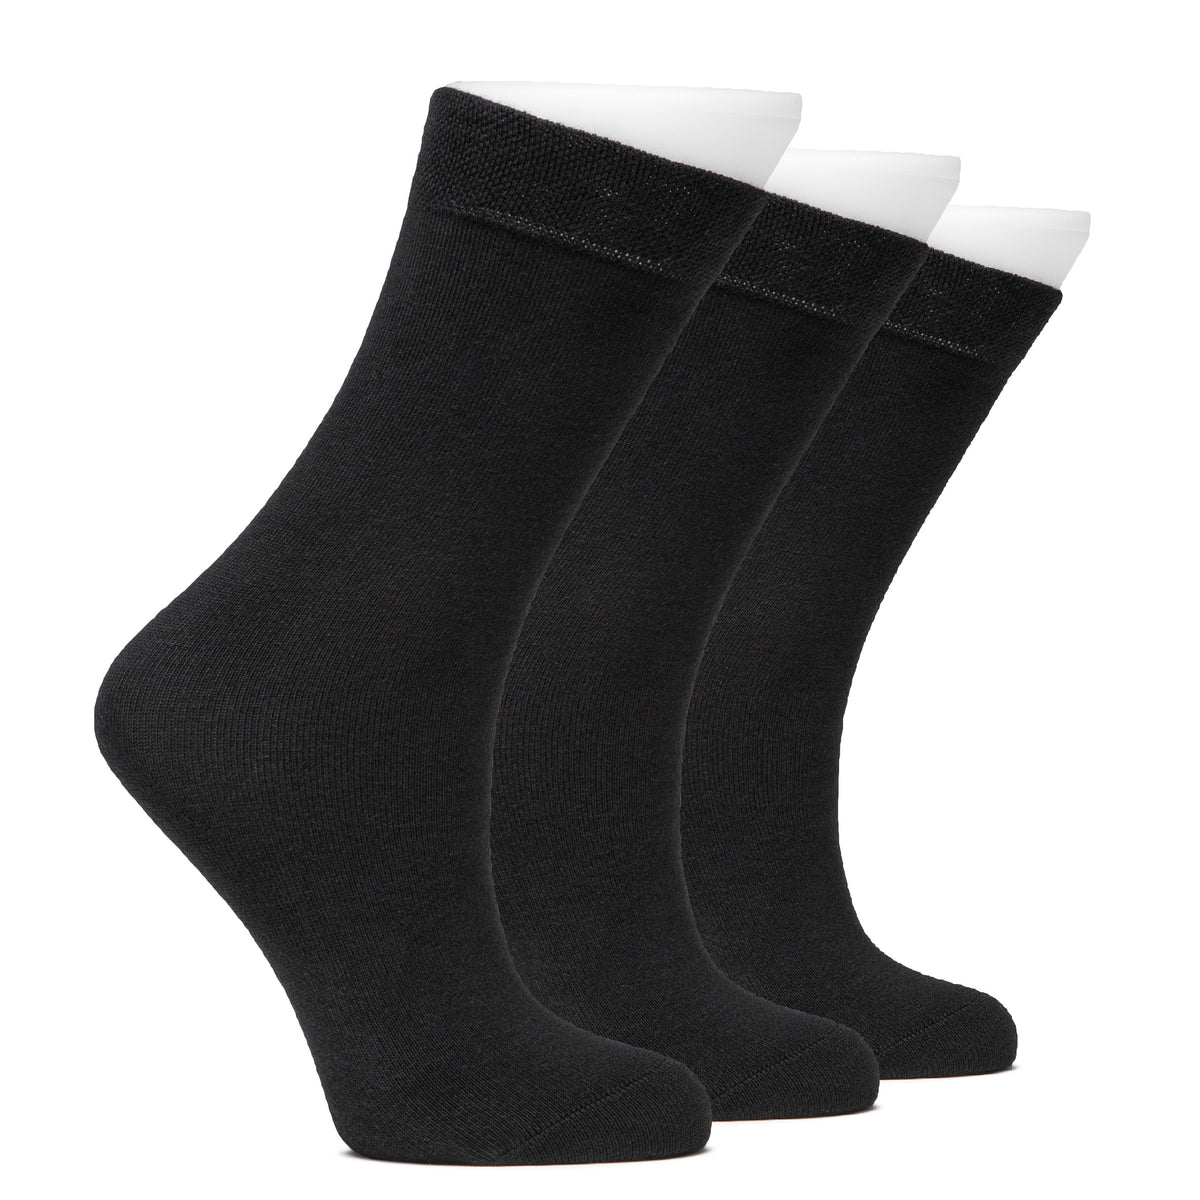 A trio of black cotton dress crew socks for kids, neatly arranged on a white background.